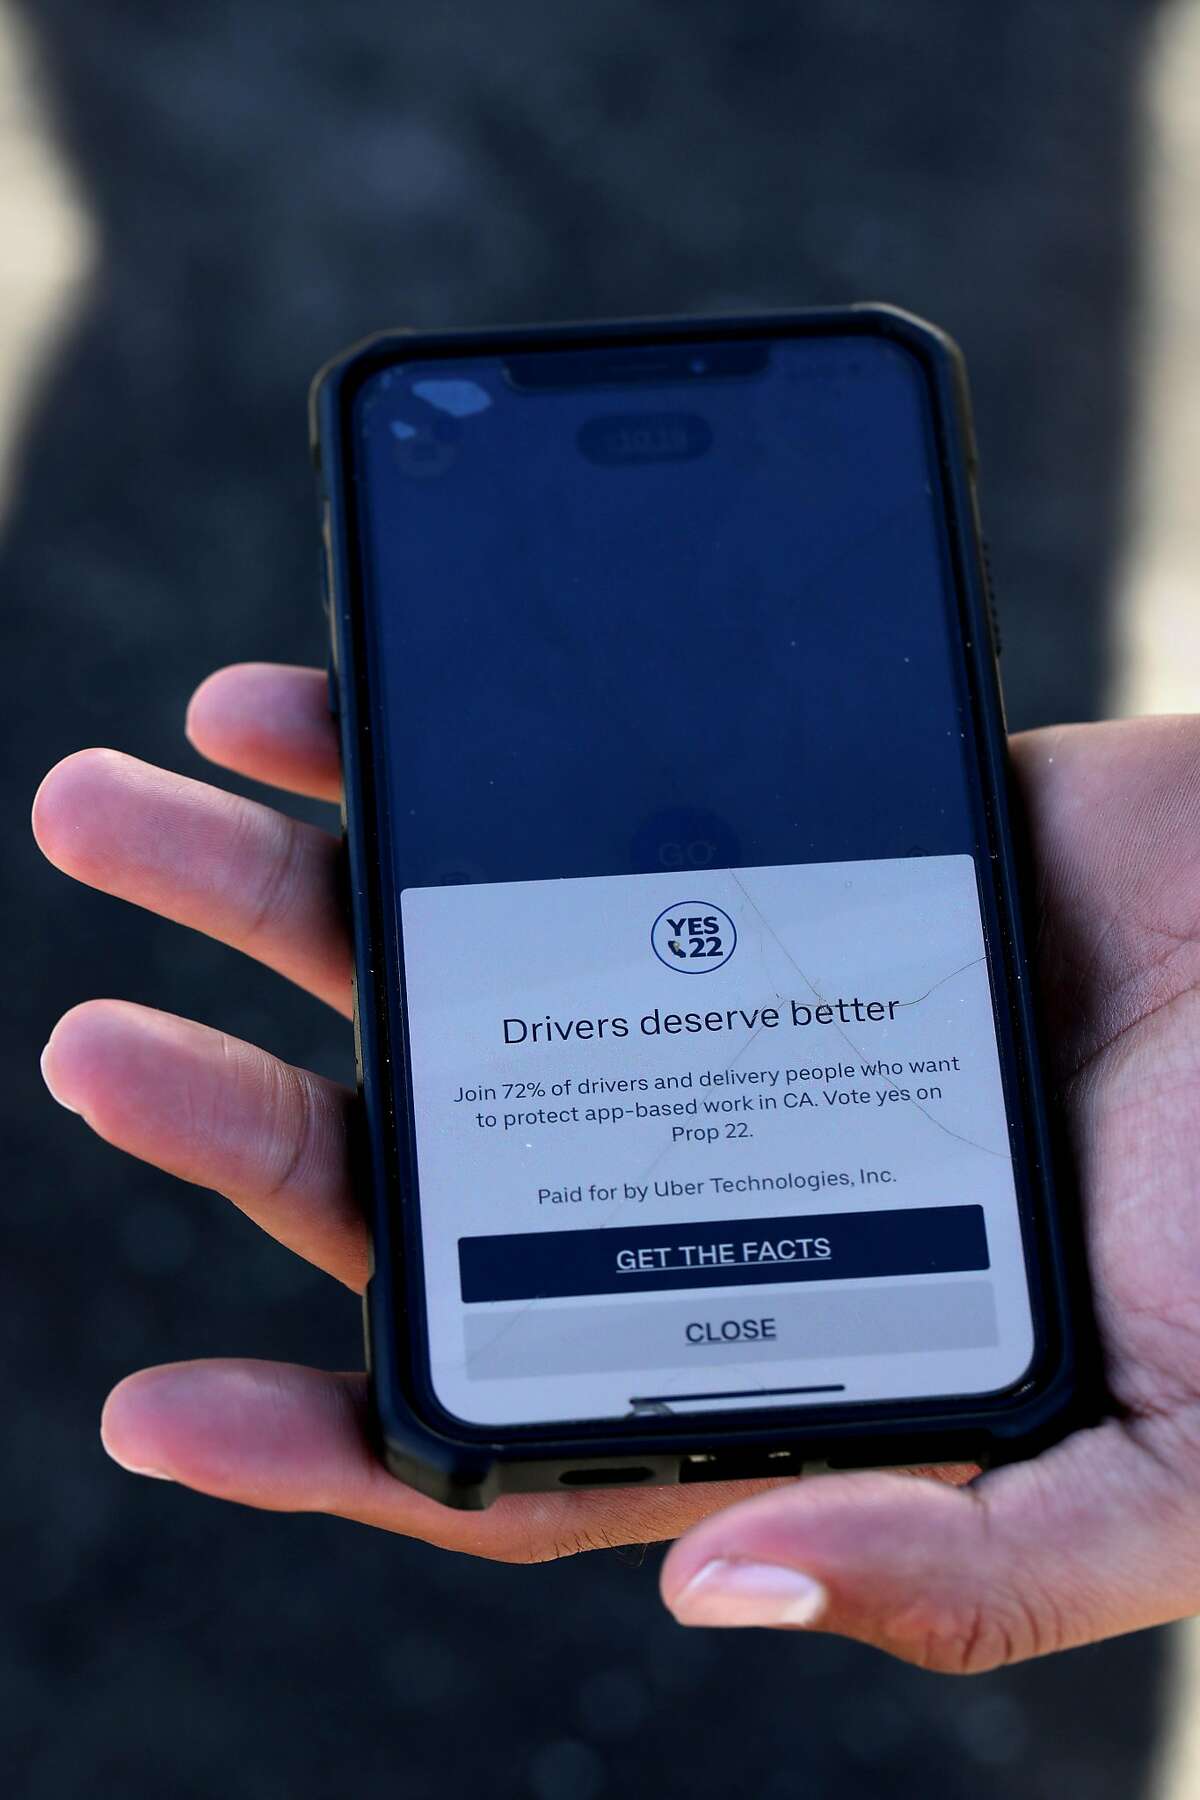 Uber driver Jorge Torres, 29, holds his phone displaying a Prop. 22 ad that the company placed in its driver app. Some drivers have complained that the campaign ads are coercive.